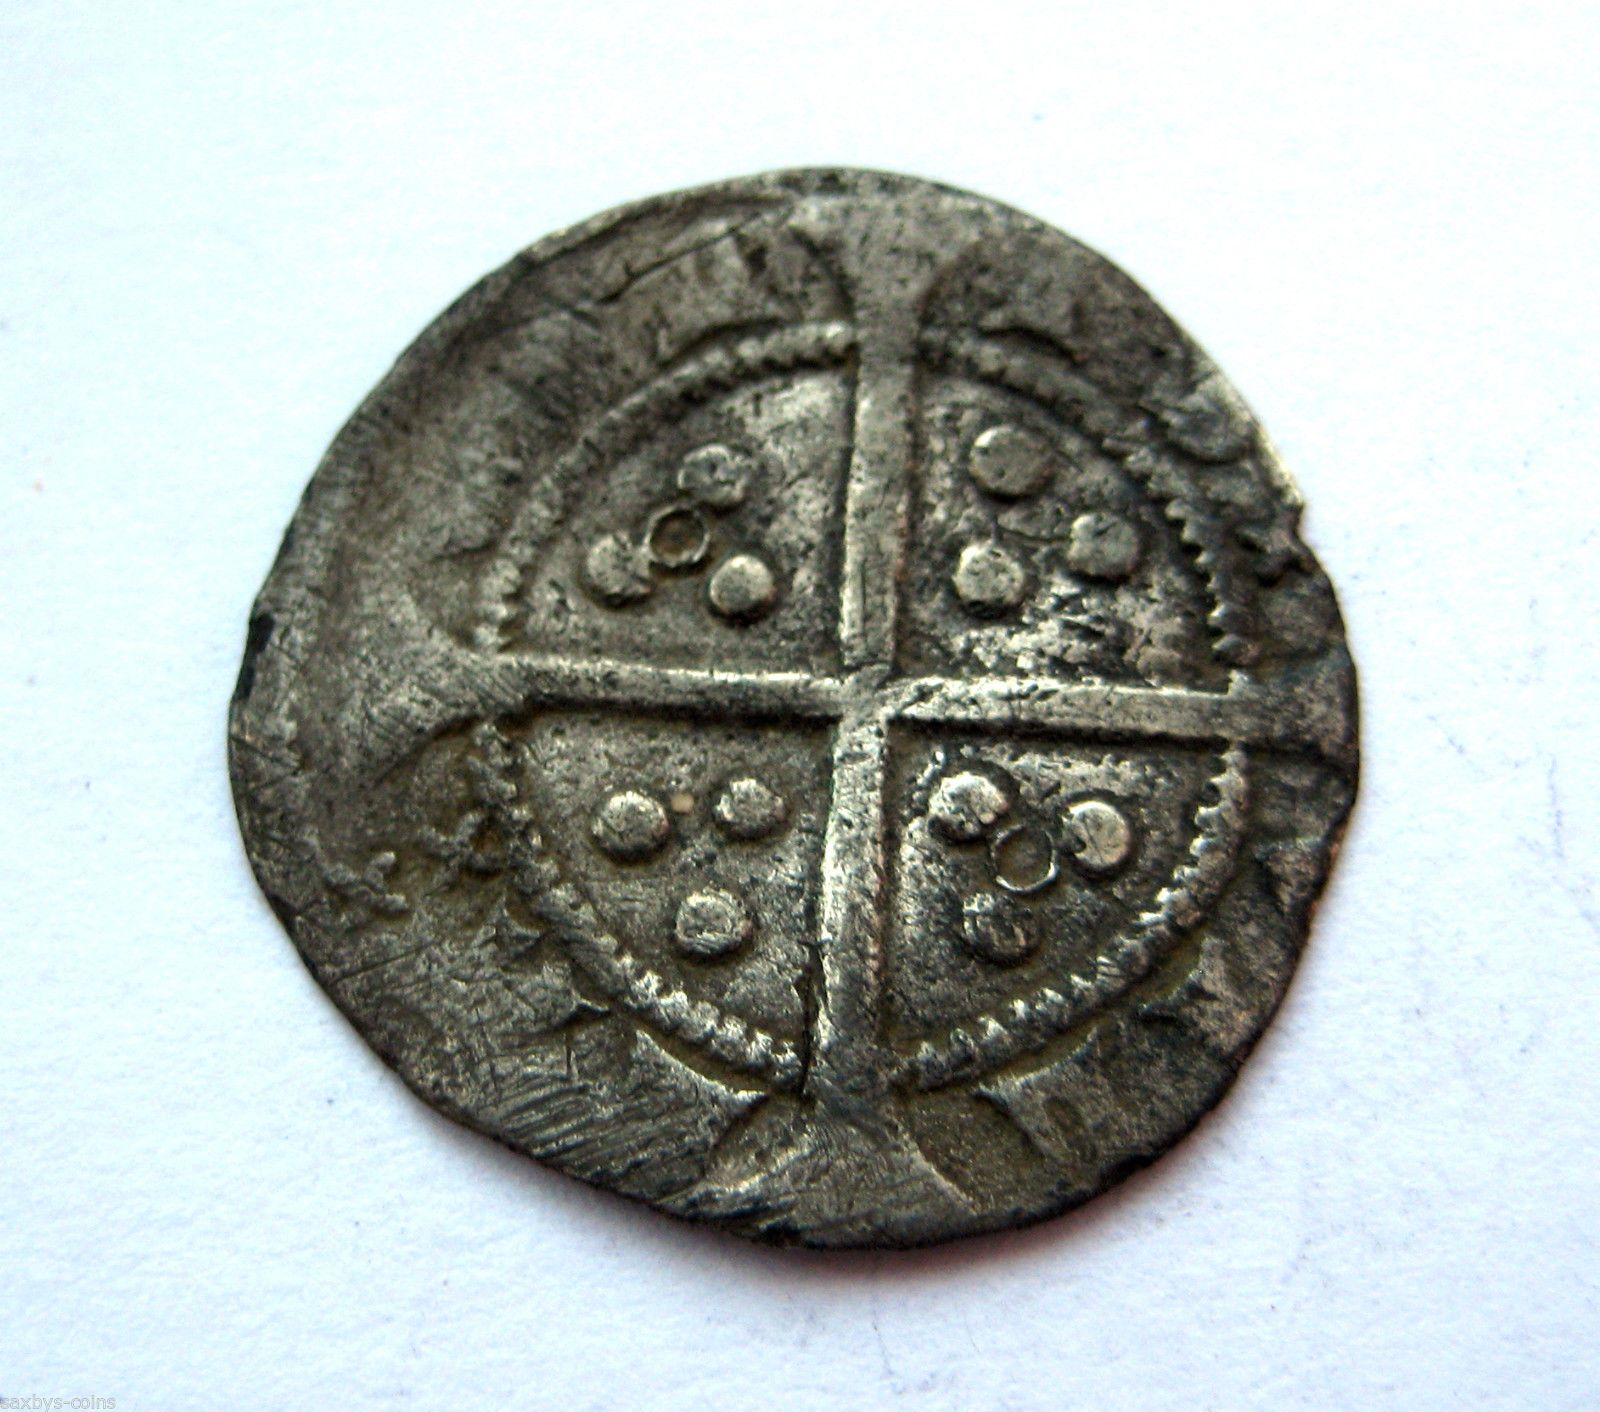 c.1399 - 1413 A.D King Henry IV England medieval Period Silver Penny ...